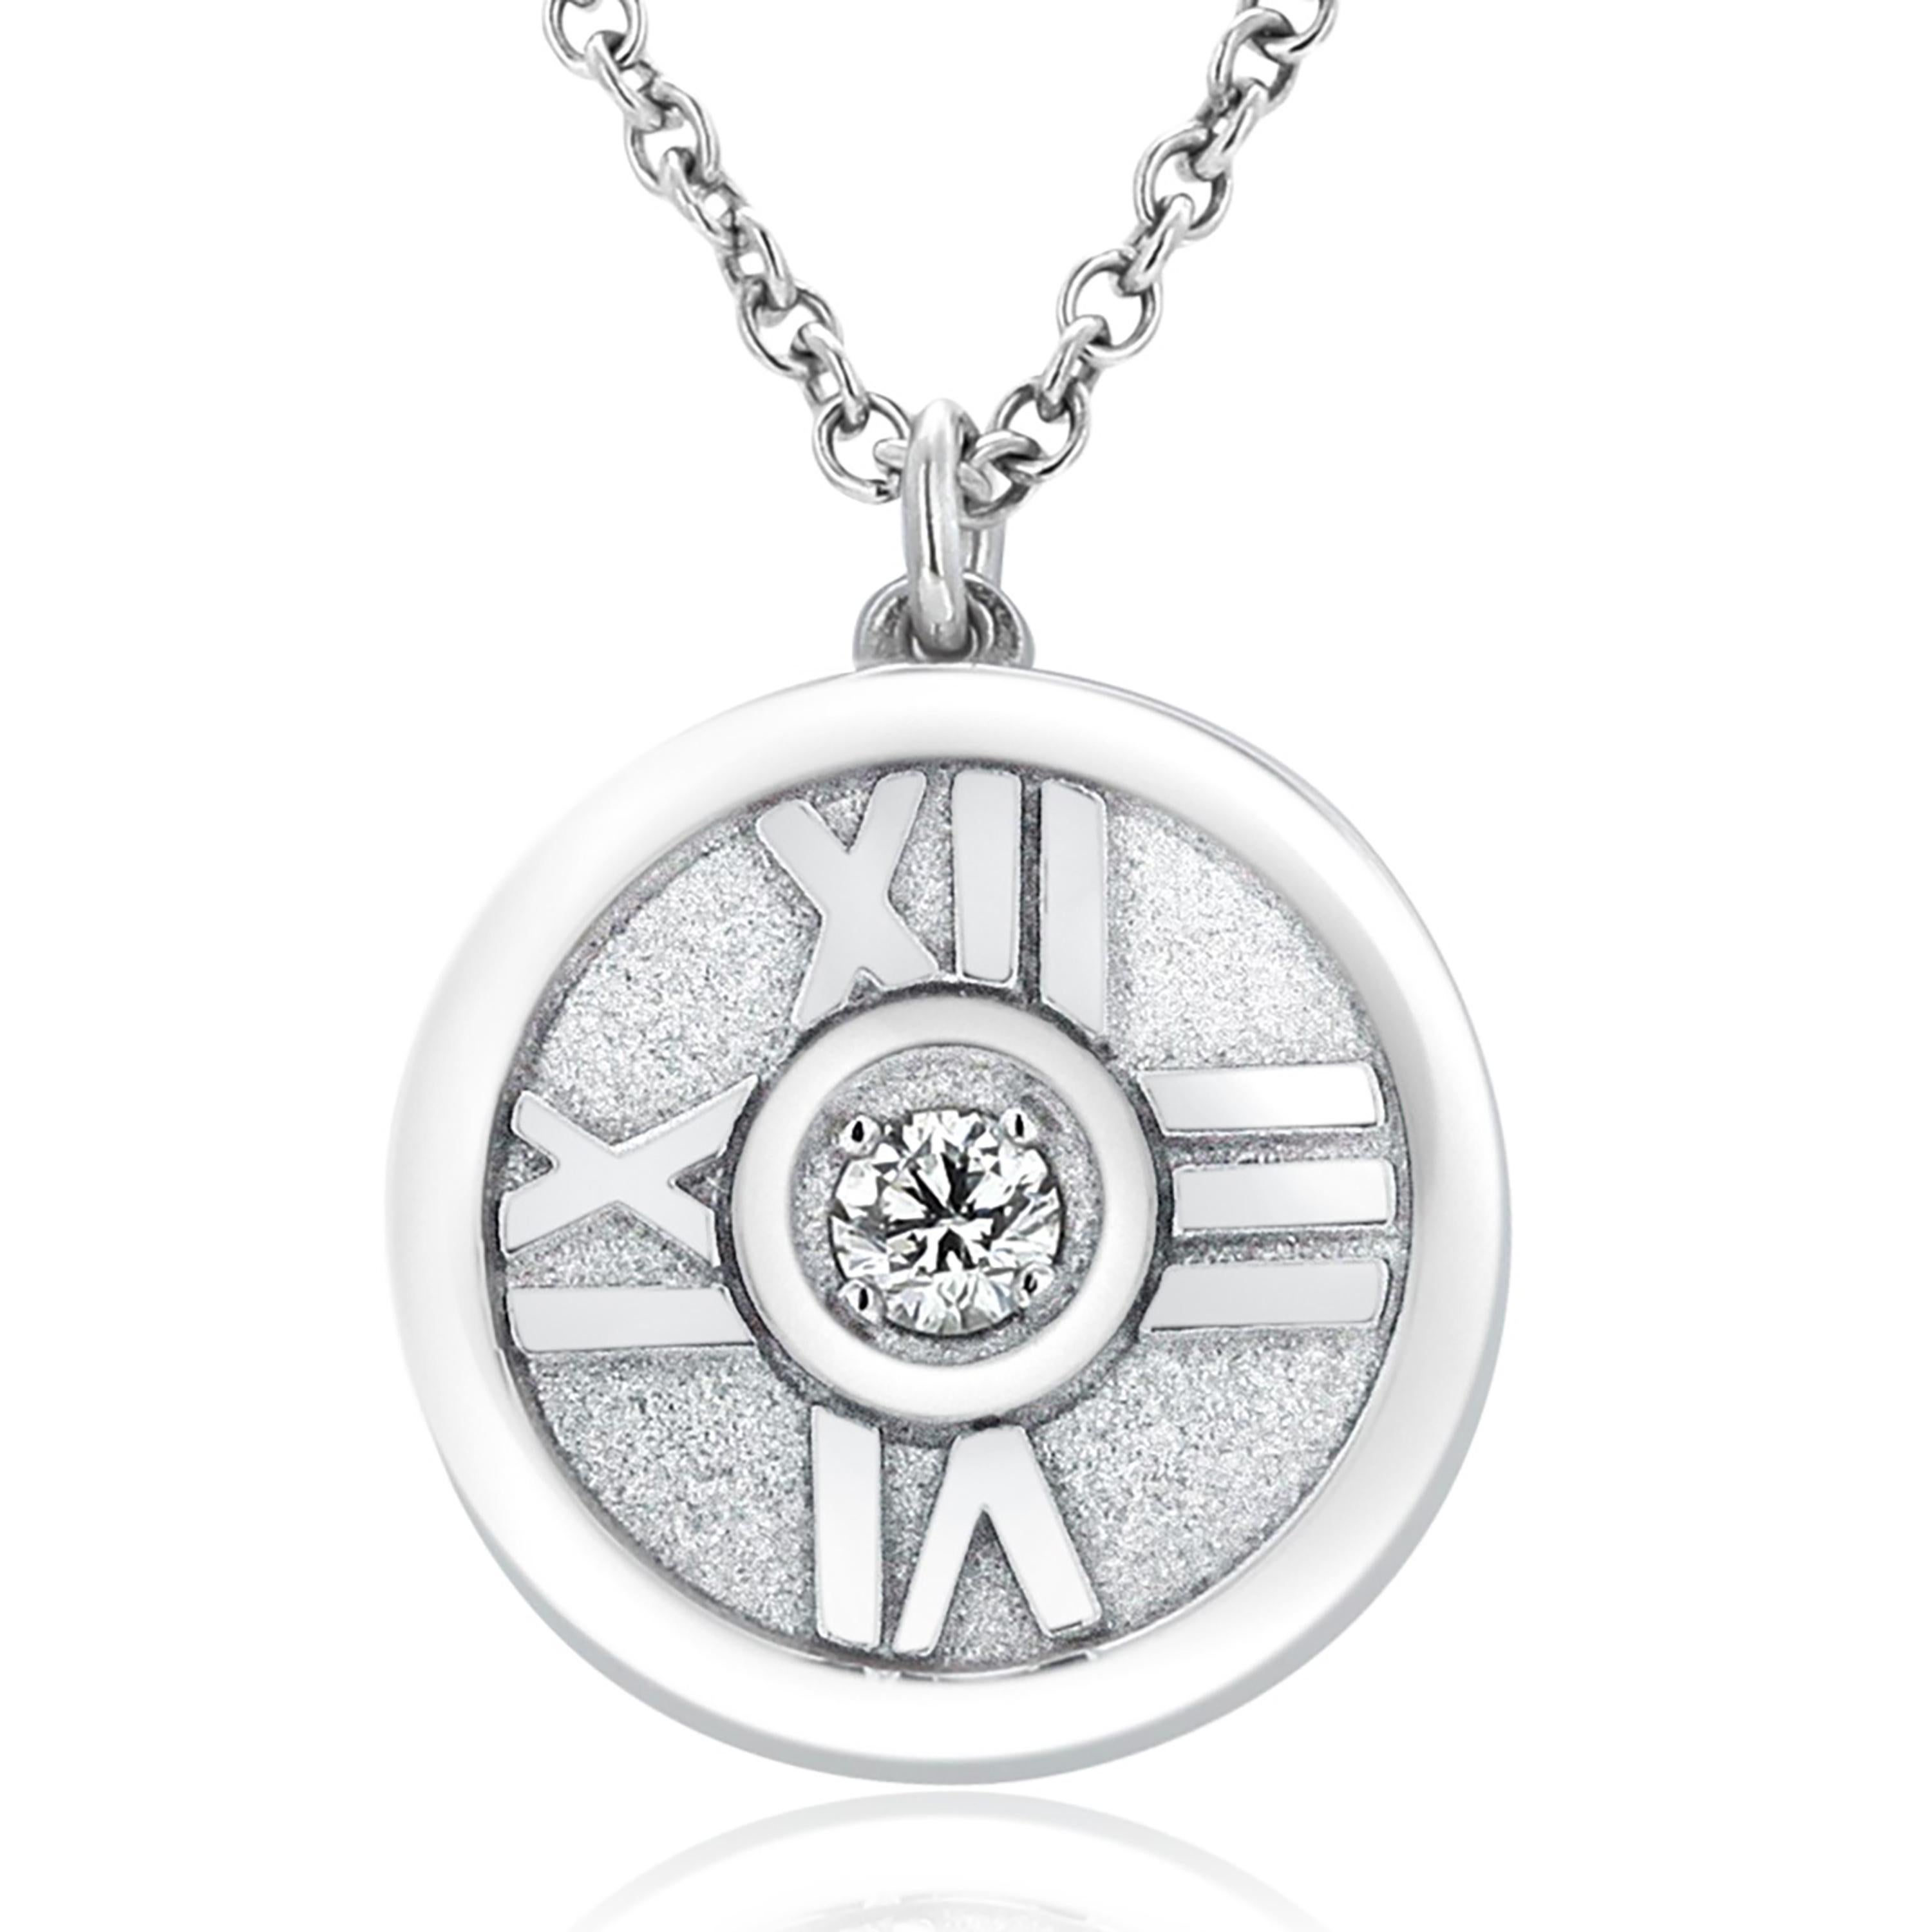 Contemporary Tiffany and Co Atlas Collection White Gold and Diamonds Pendant Necklace